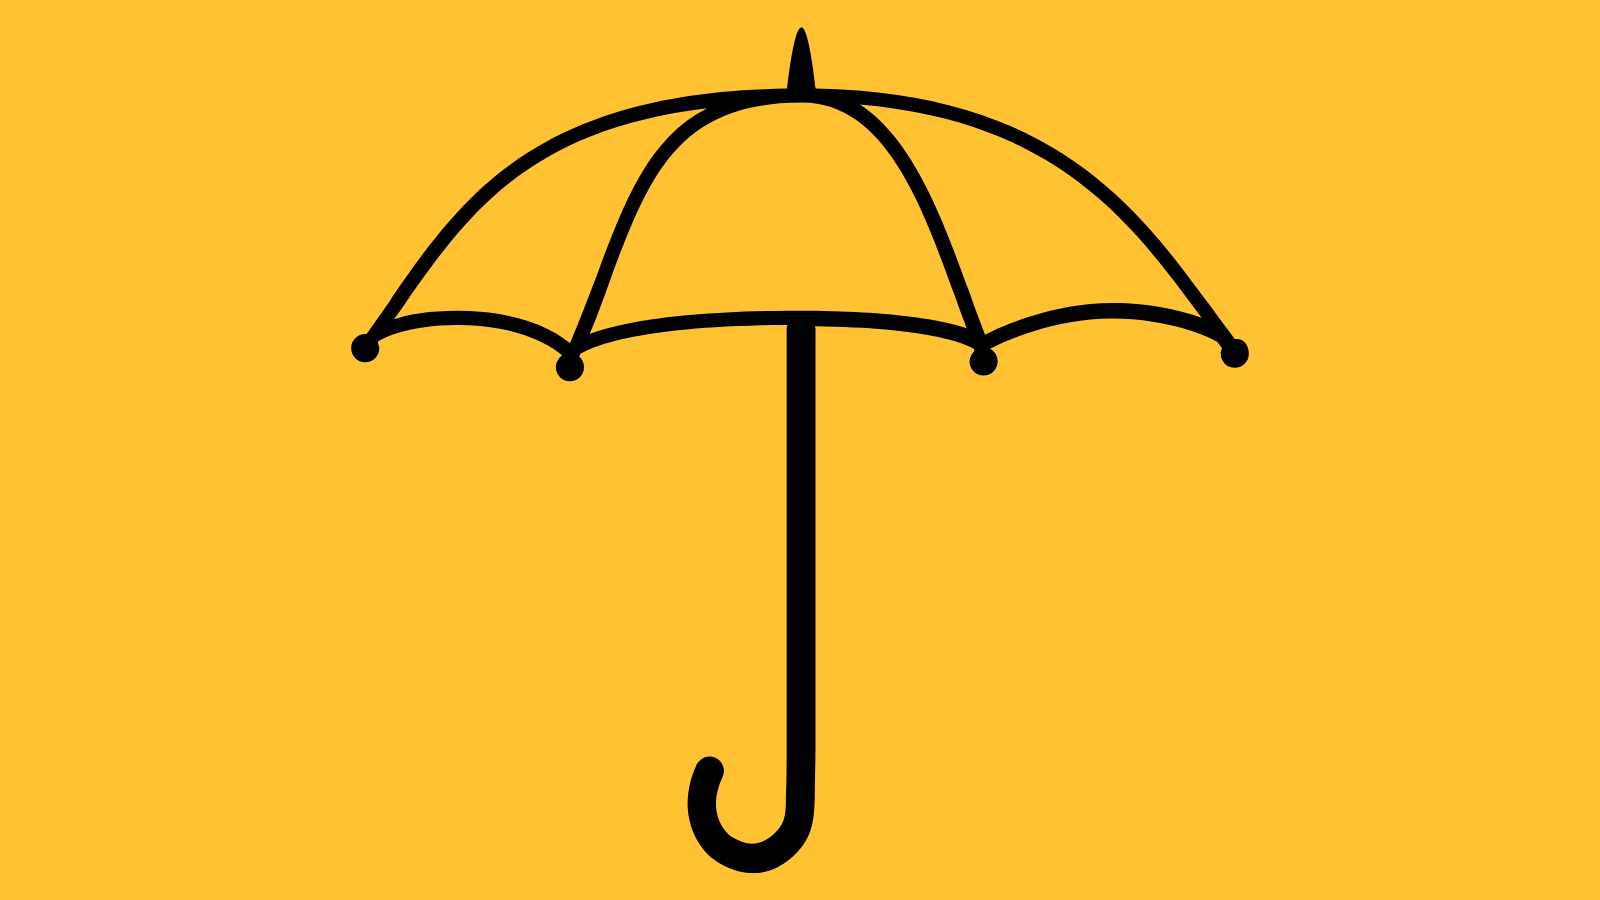 A line drawing of an umbrella